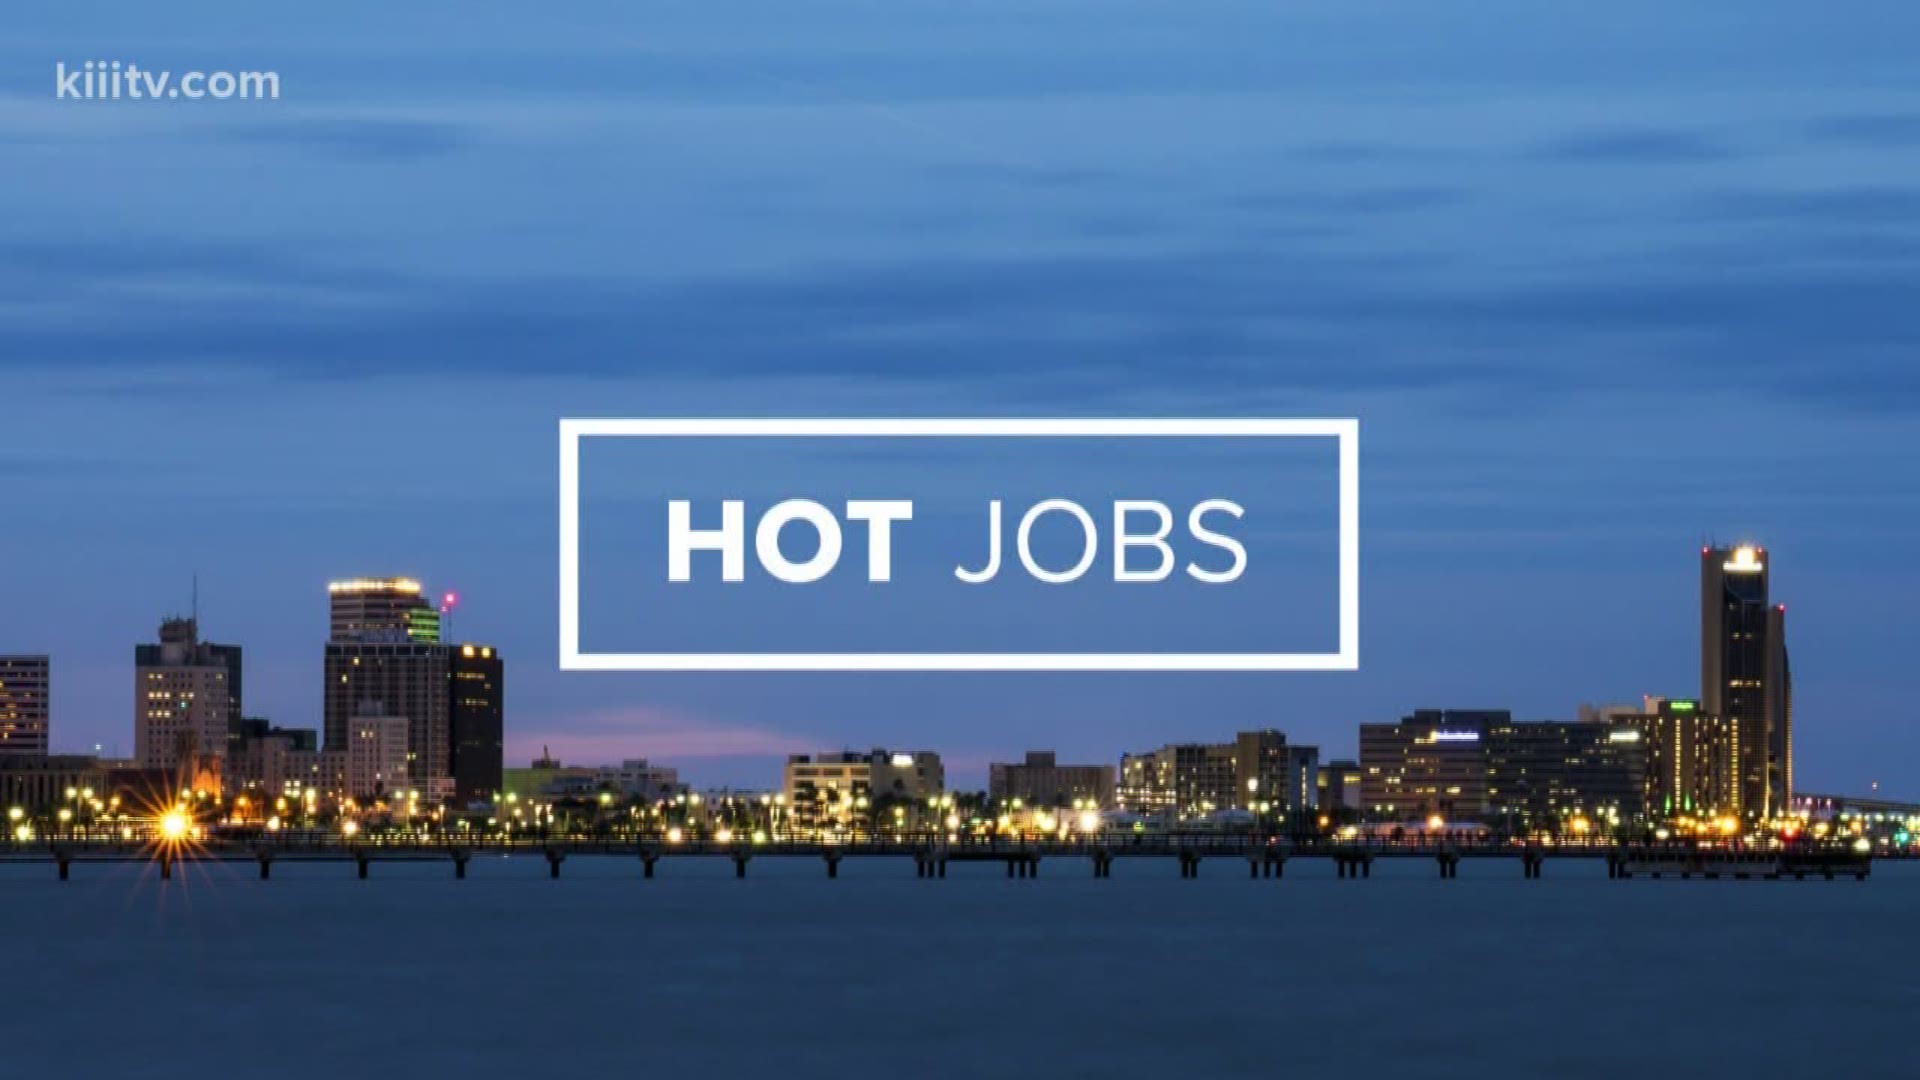 3News weekly Hot Jobs report brought to you by Workforce Solutions of the Coastal Bend.